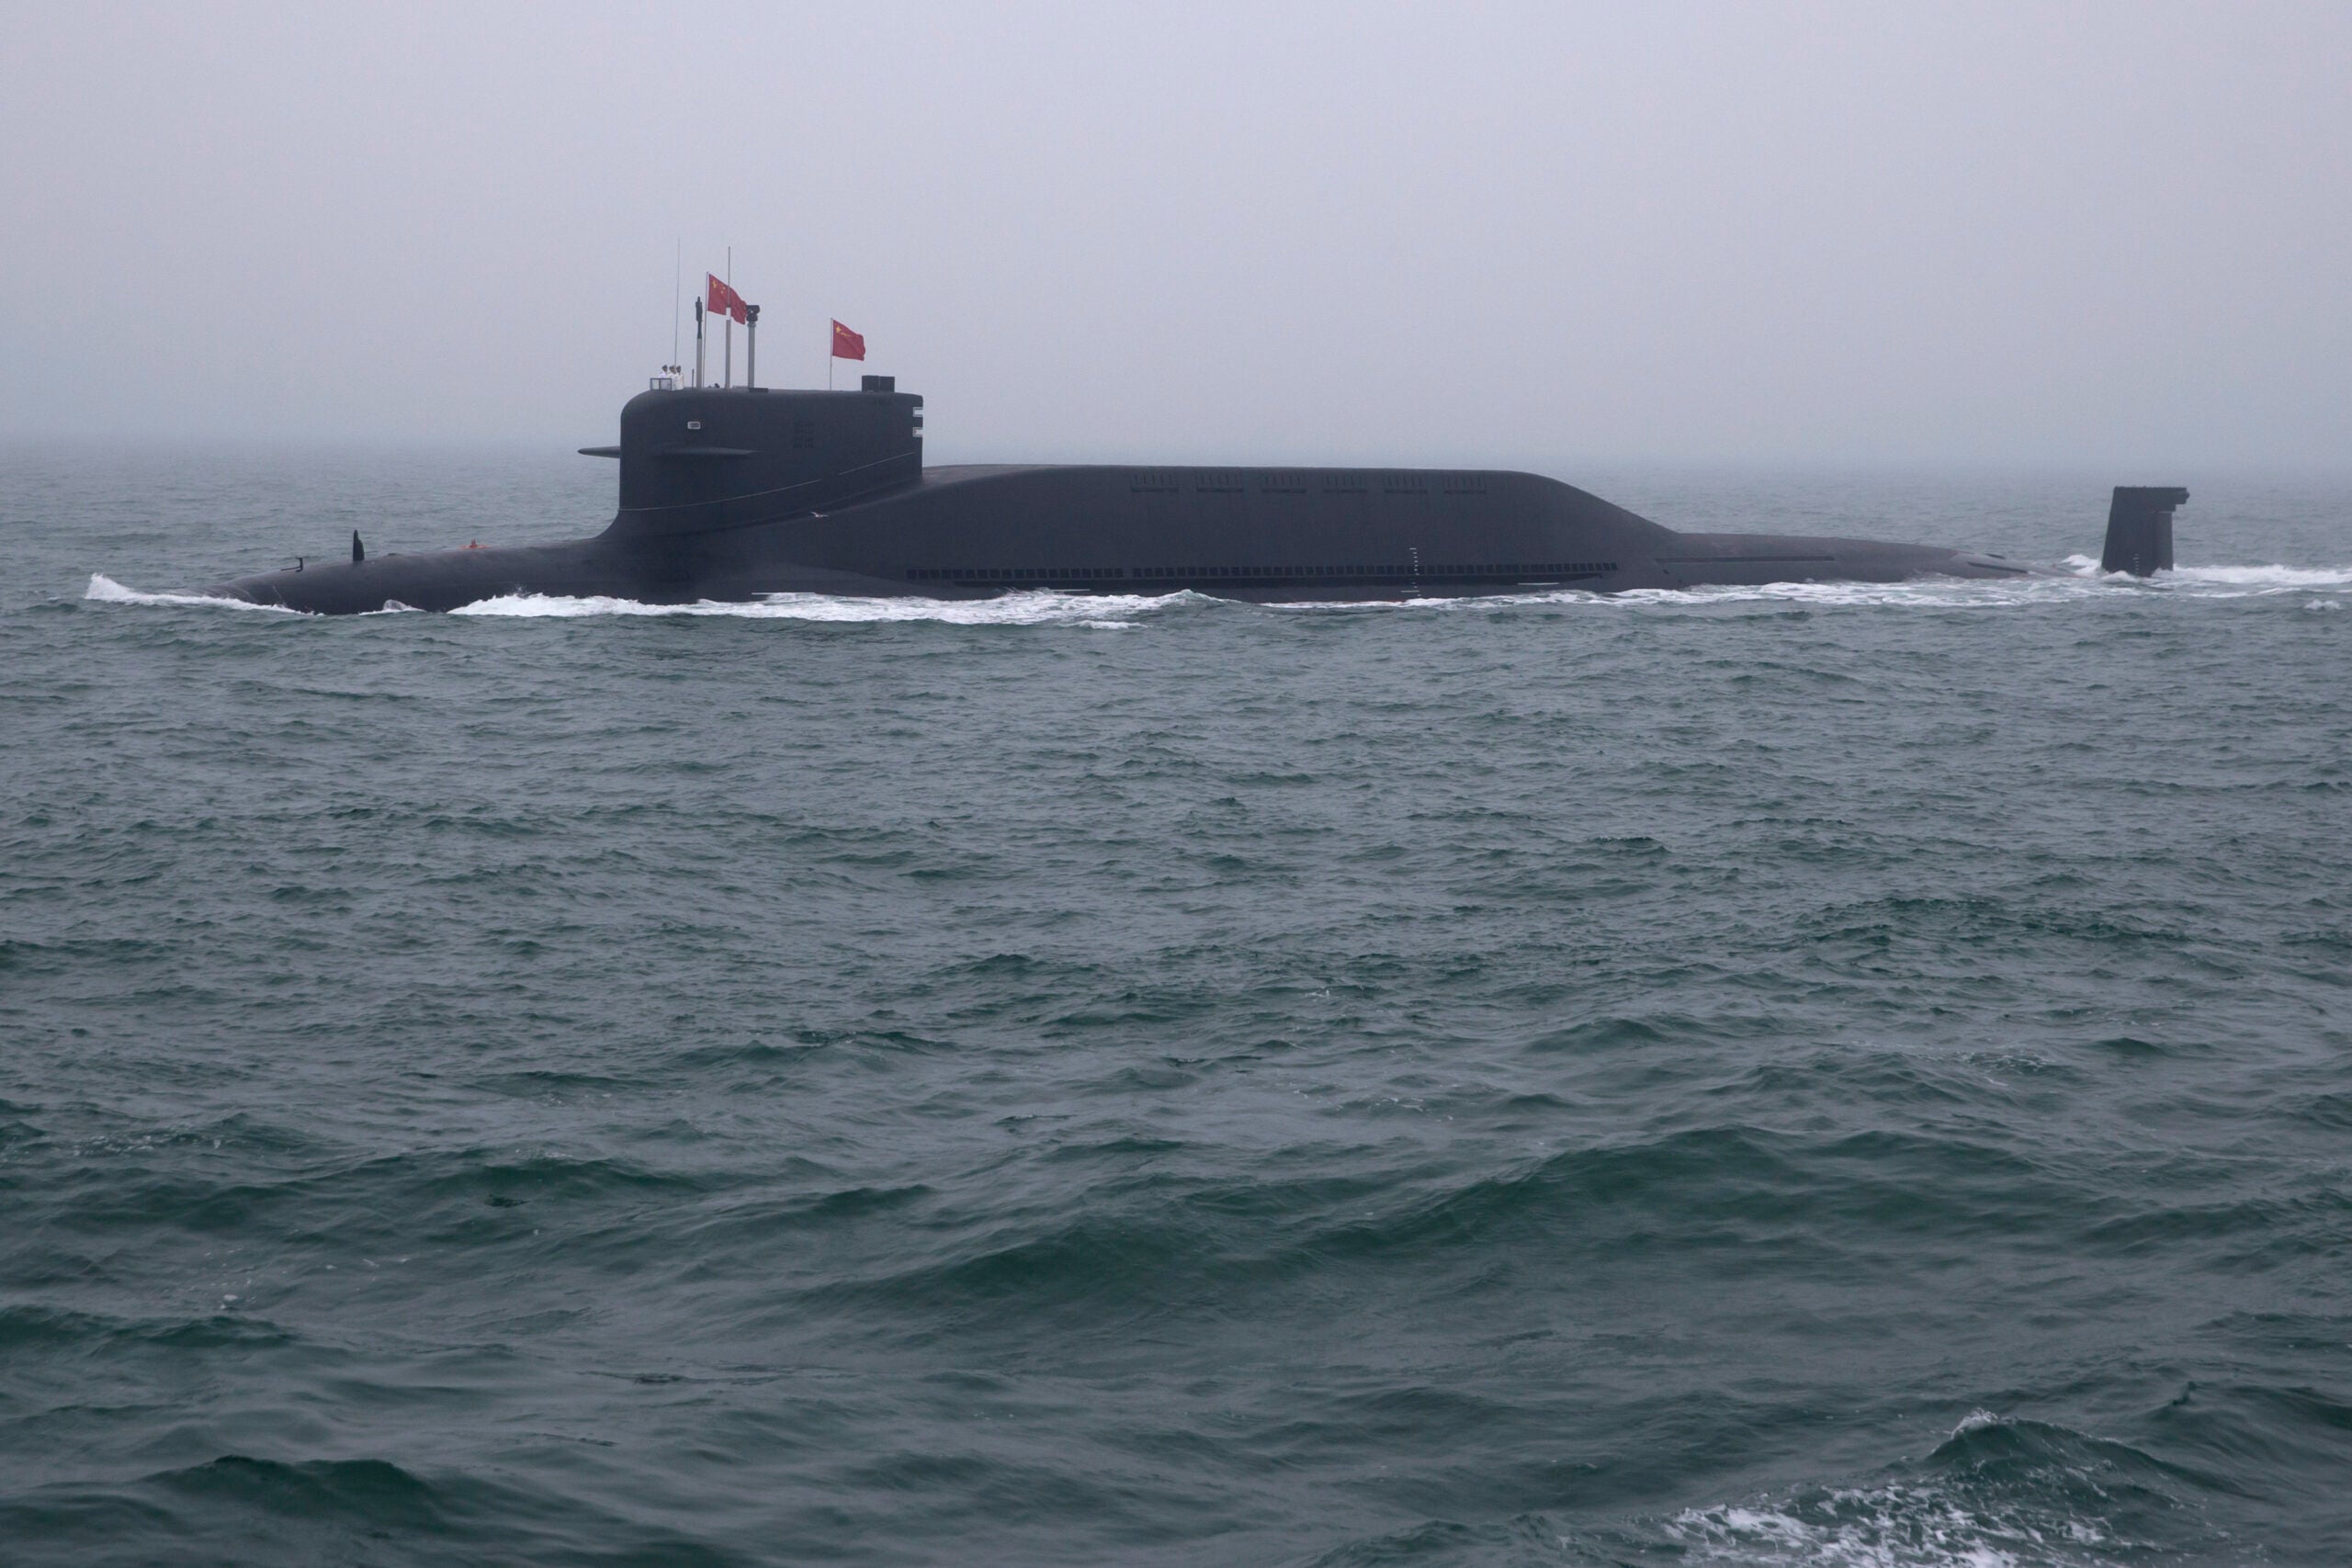 A type 094 Jin-class nuclear submarine Long March 15 of the Chinese People's Liberation Army (PLA) Navy participates in a naval parade to commemorate the 70th anniversary of the founding of China's PLA Navy in the sea near Qingdao, in eastern China's Shandong province on April 23, 2019. - China celebrated the 70th anniversary of its navy by showing off its growing fleet in a sea parade featuring a brand new guided-missile destroyer. (Photo by Mark Schiefelbein / POOL / AFP)        (Photo credit should read MARK SCHIEFELBEIN/AFP via Getty Images)